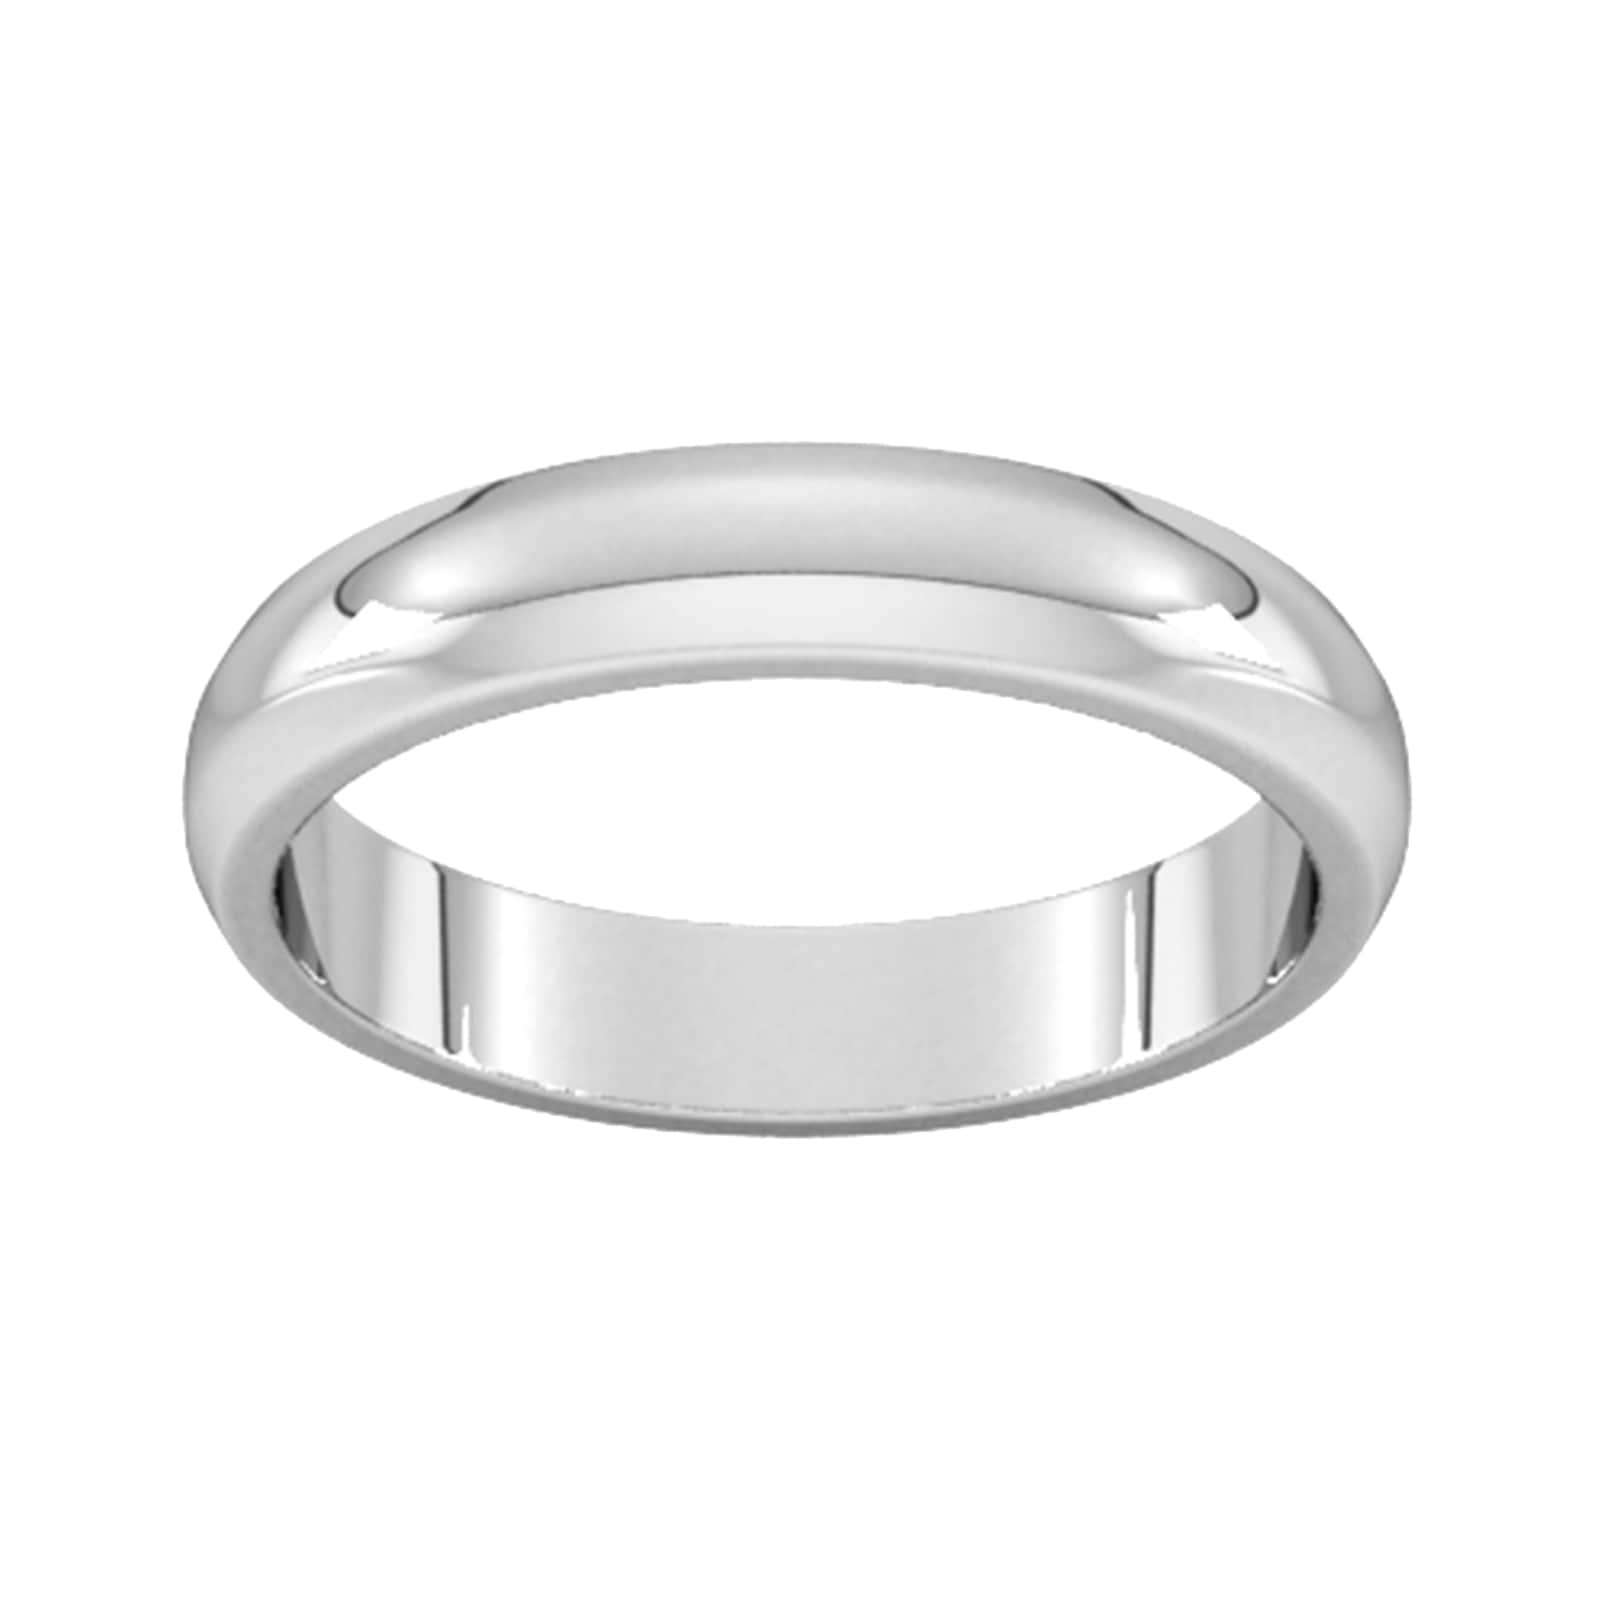 4mm D Shape Heavy Wedding Ring In Sterling Silver - Ring Size G